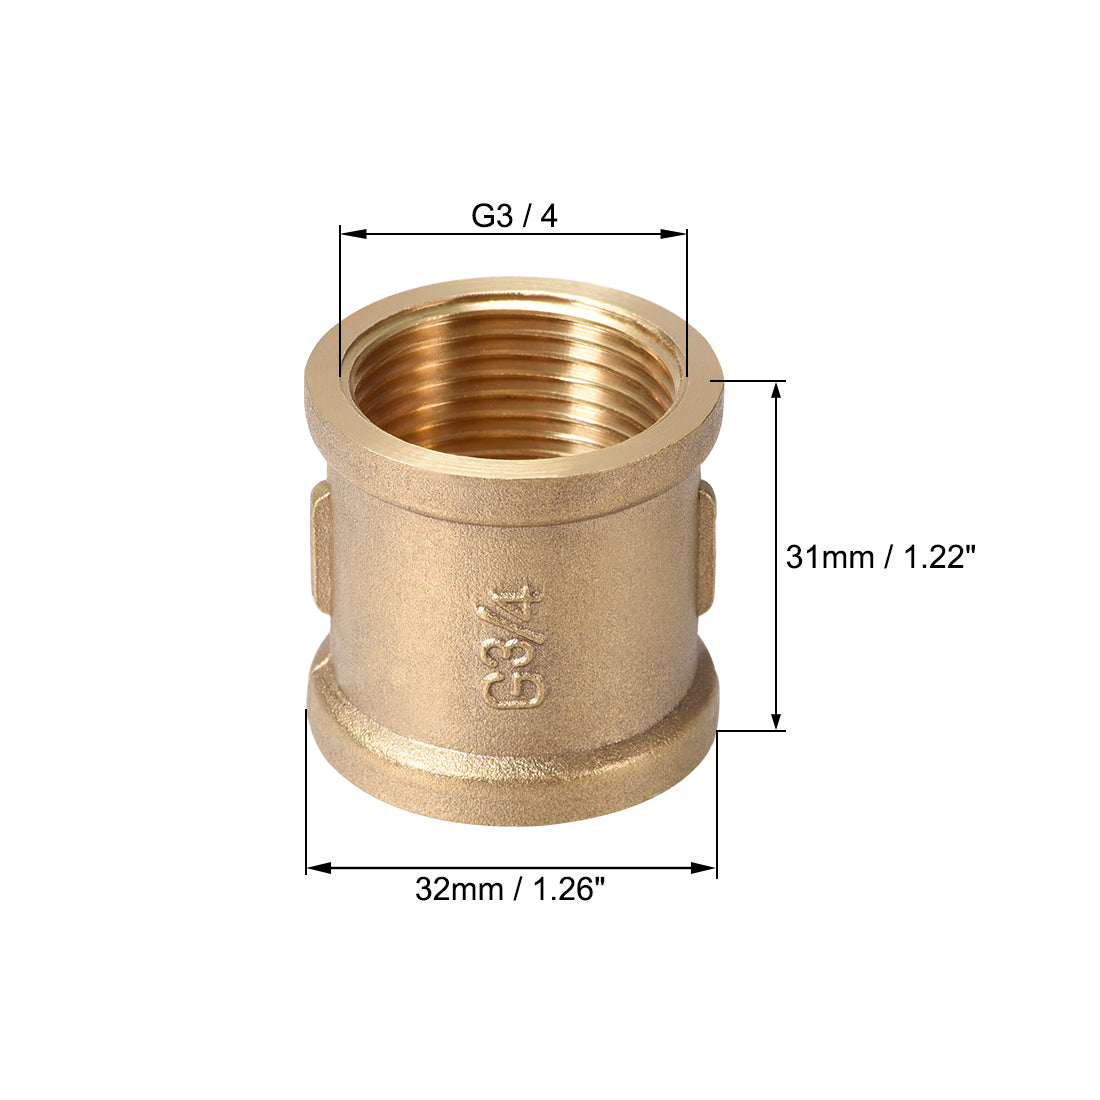 uxcell Uxcell Brass Cast Pipe Fittings Coupling 3/4 x 3/4 G Female Thread Gold Tone